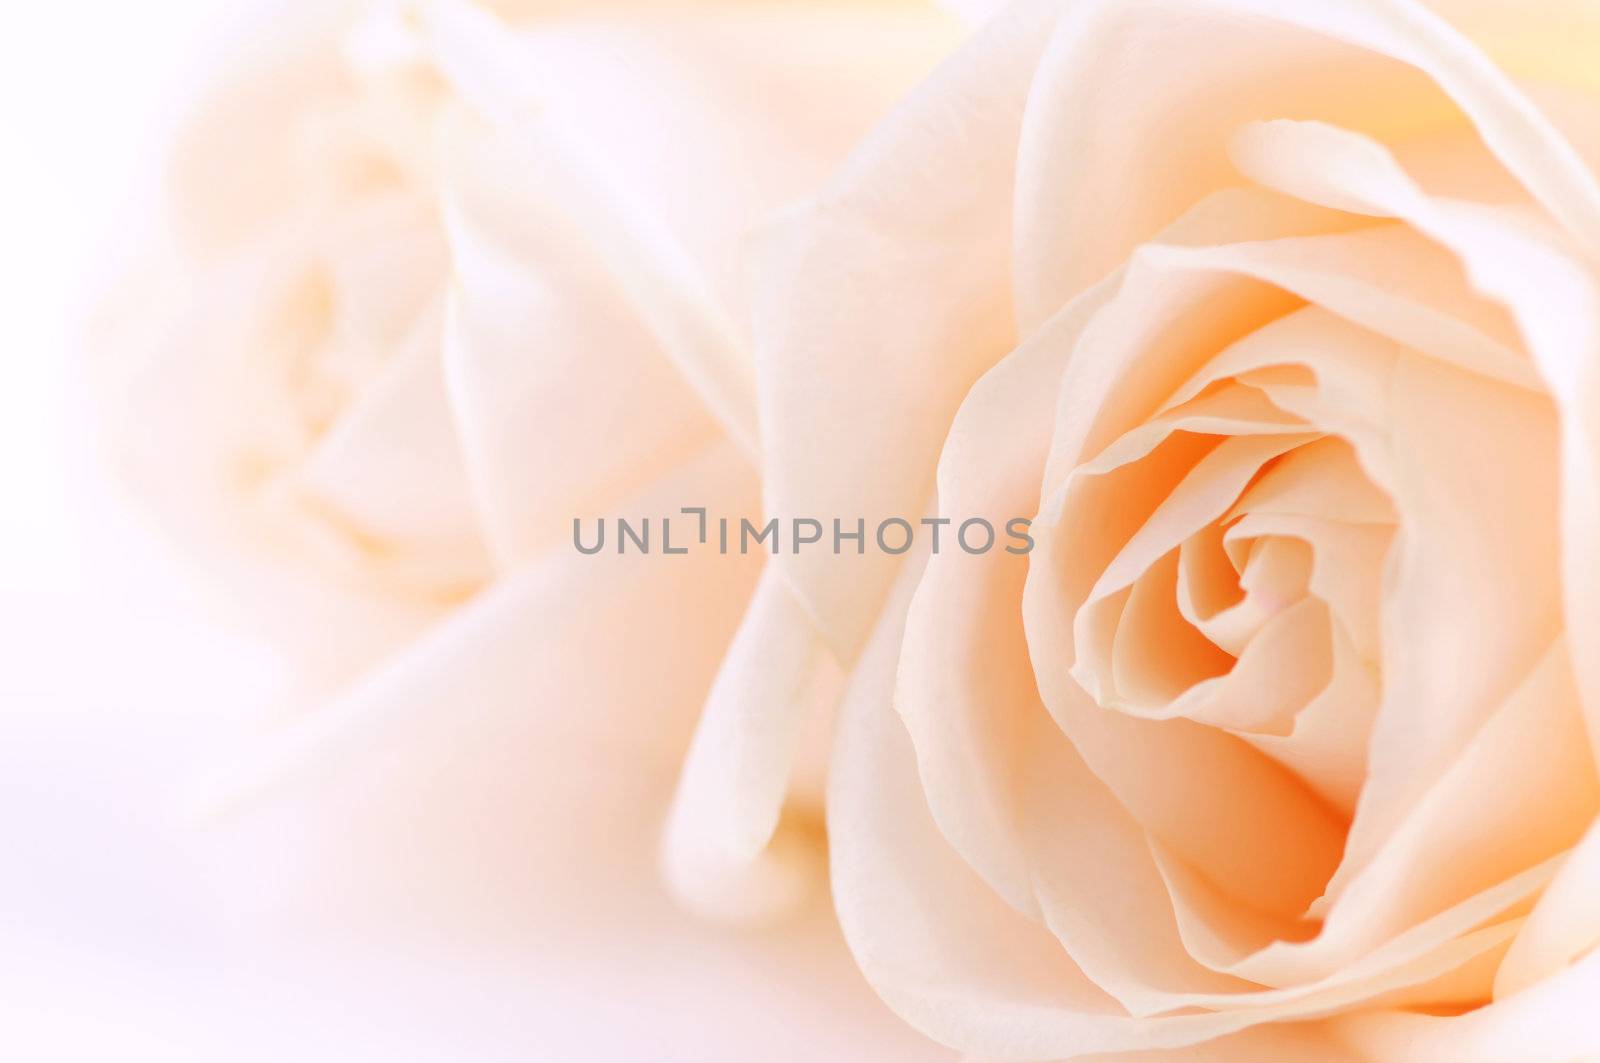 Macro of two delicate beige roses on white background